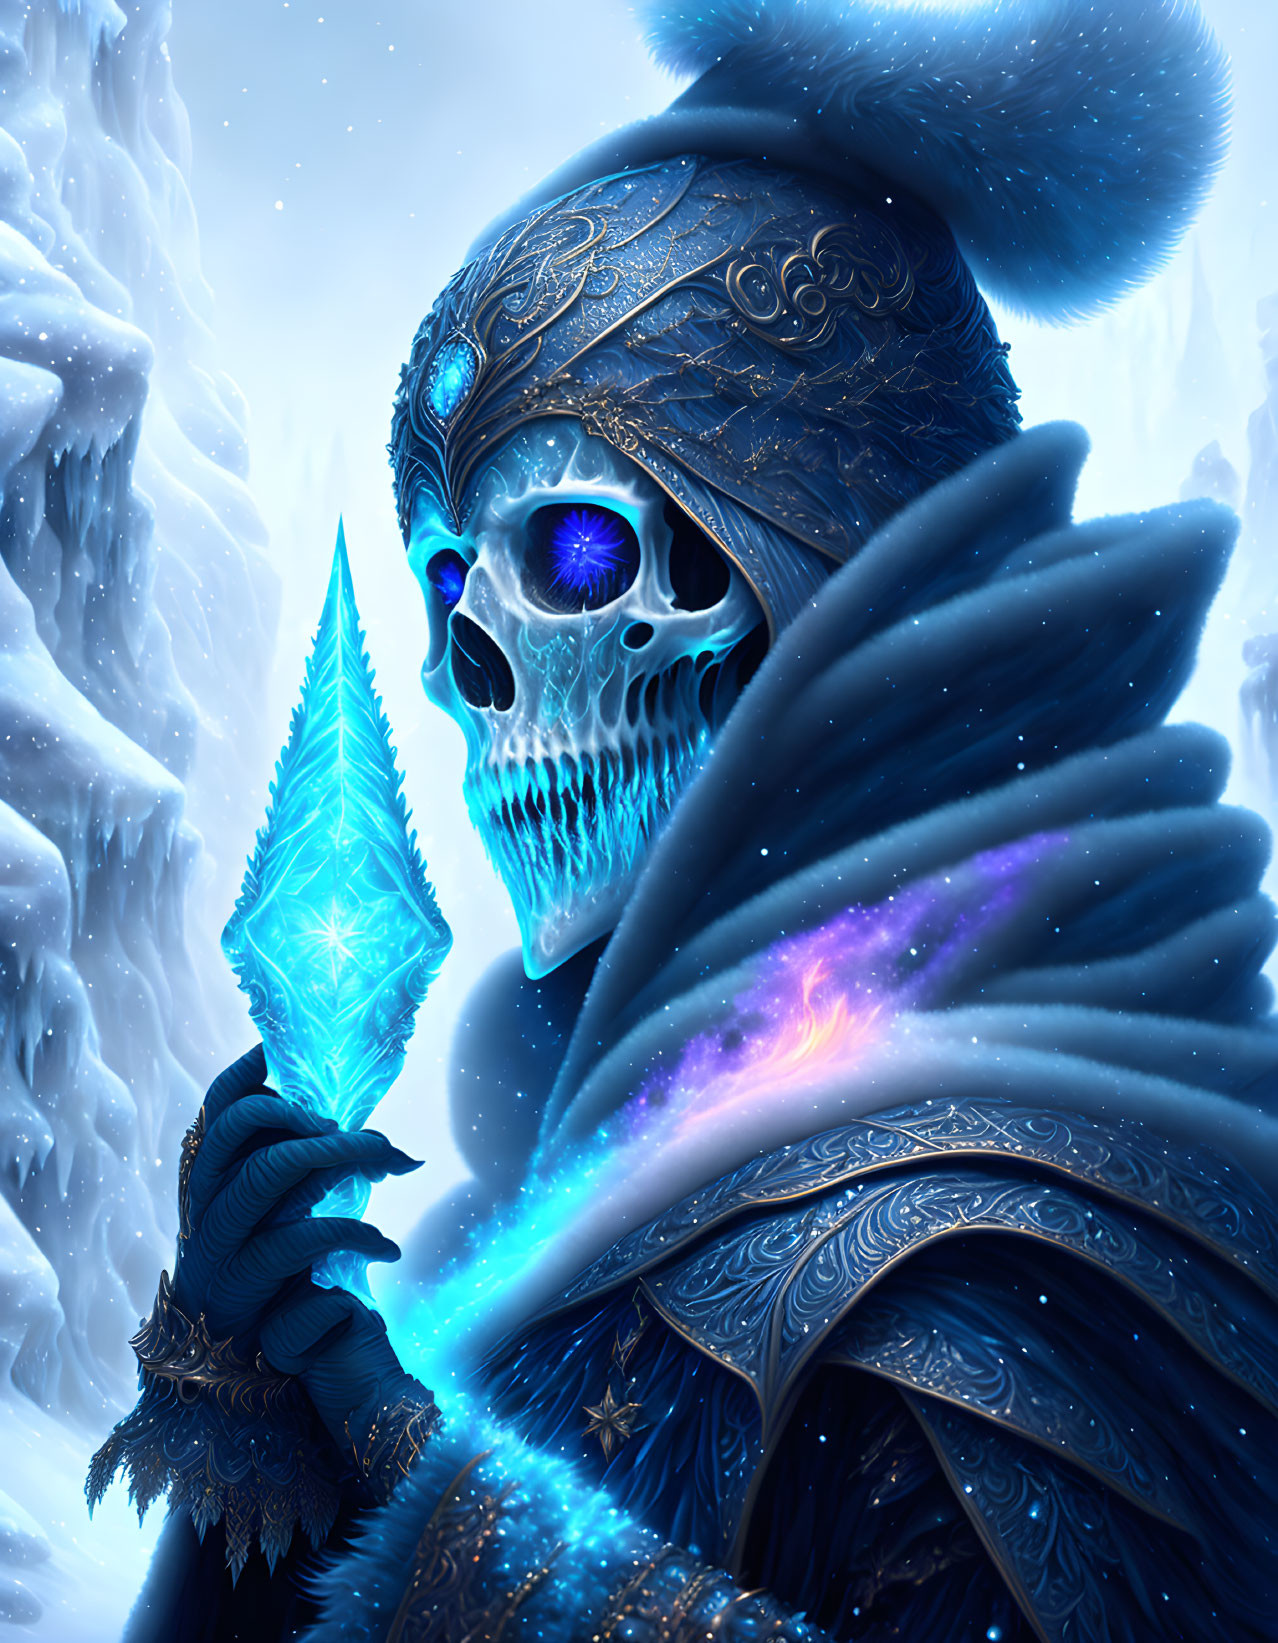 Ethereal skeletal figure in ornate blue armor with ice crystal on snowy background